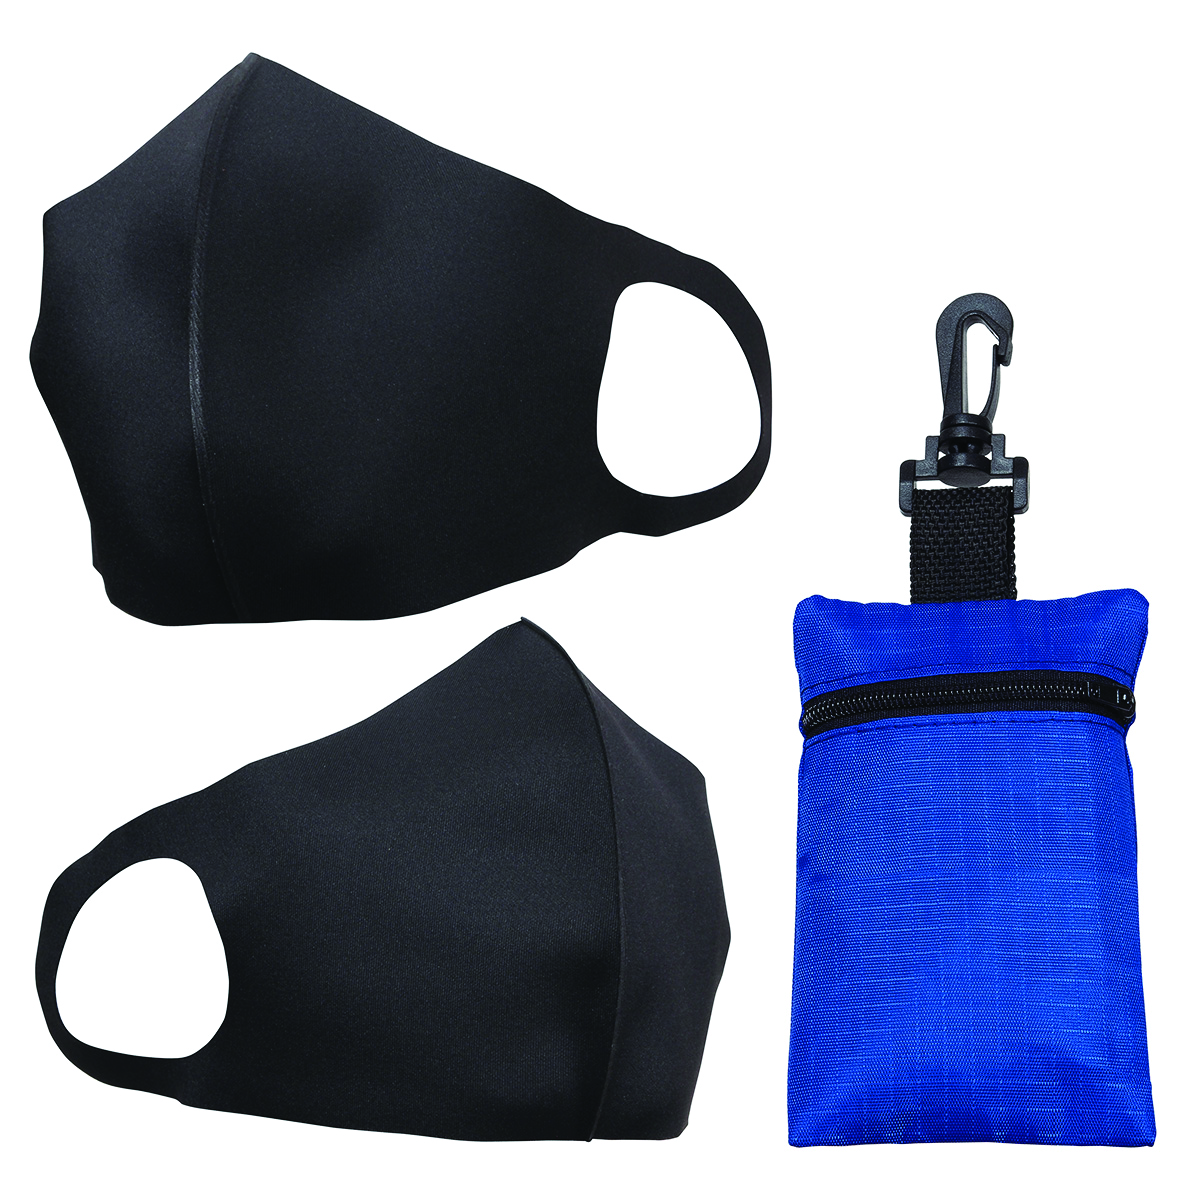 Black Mask/Blue Pouch Comfort FLEX Mask with Travel Pouch